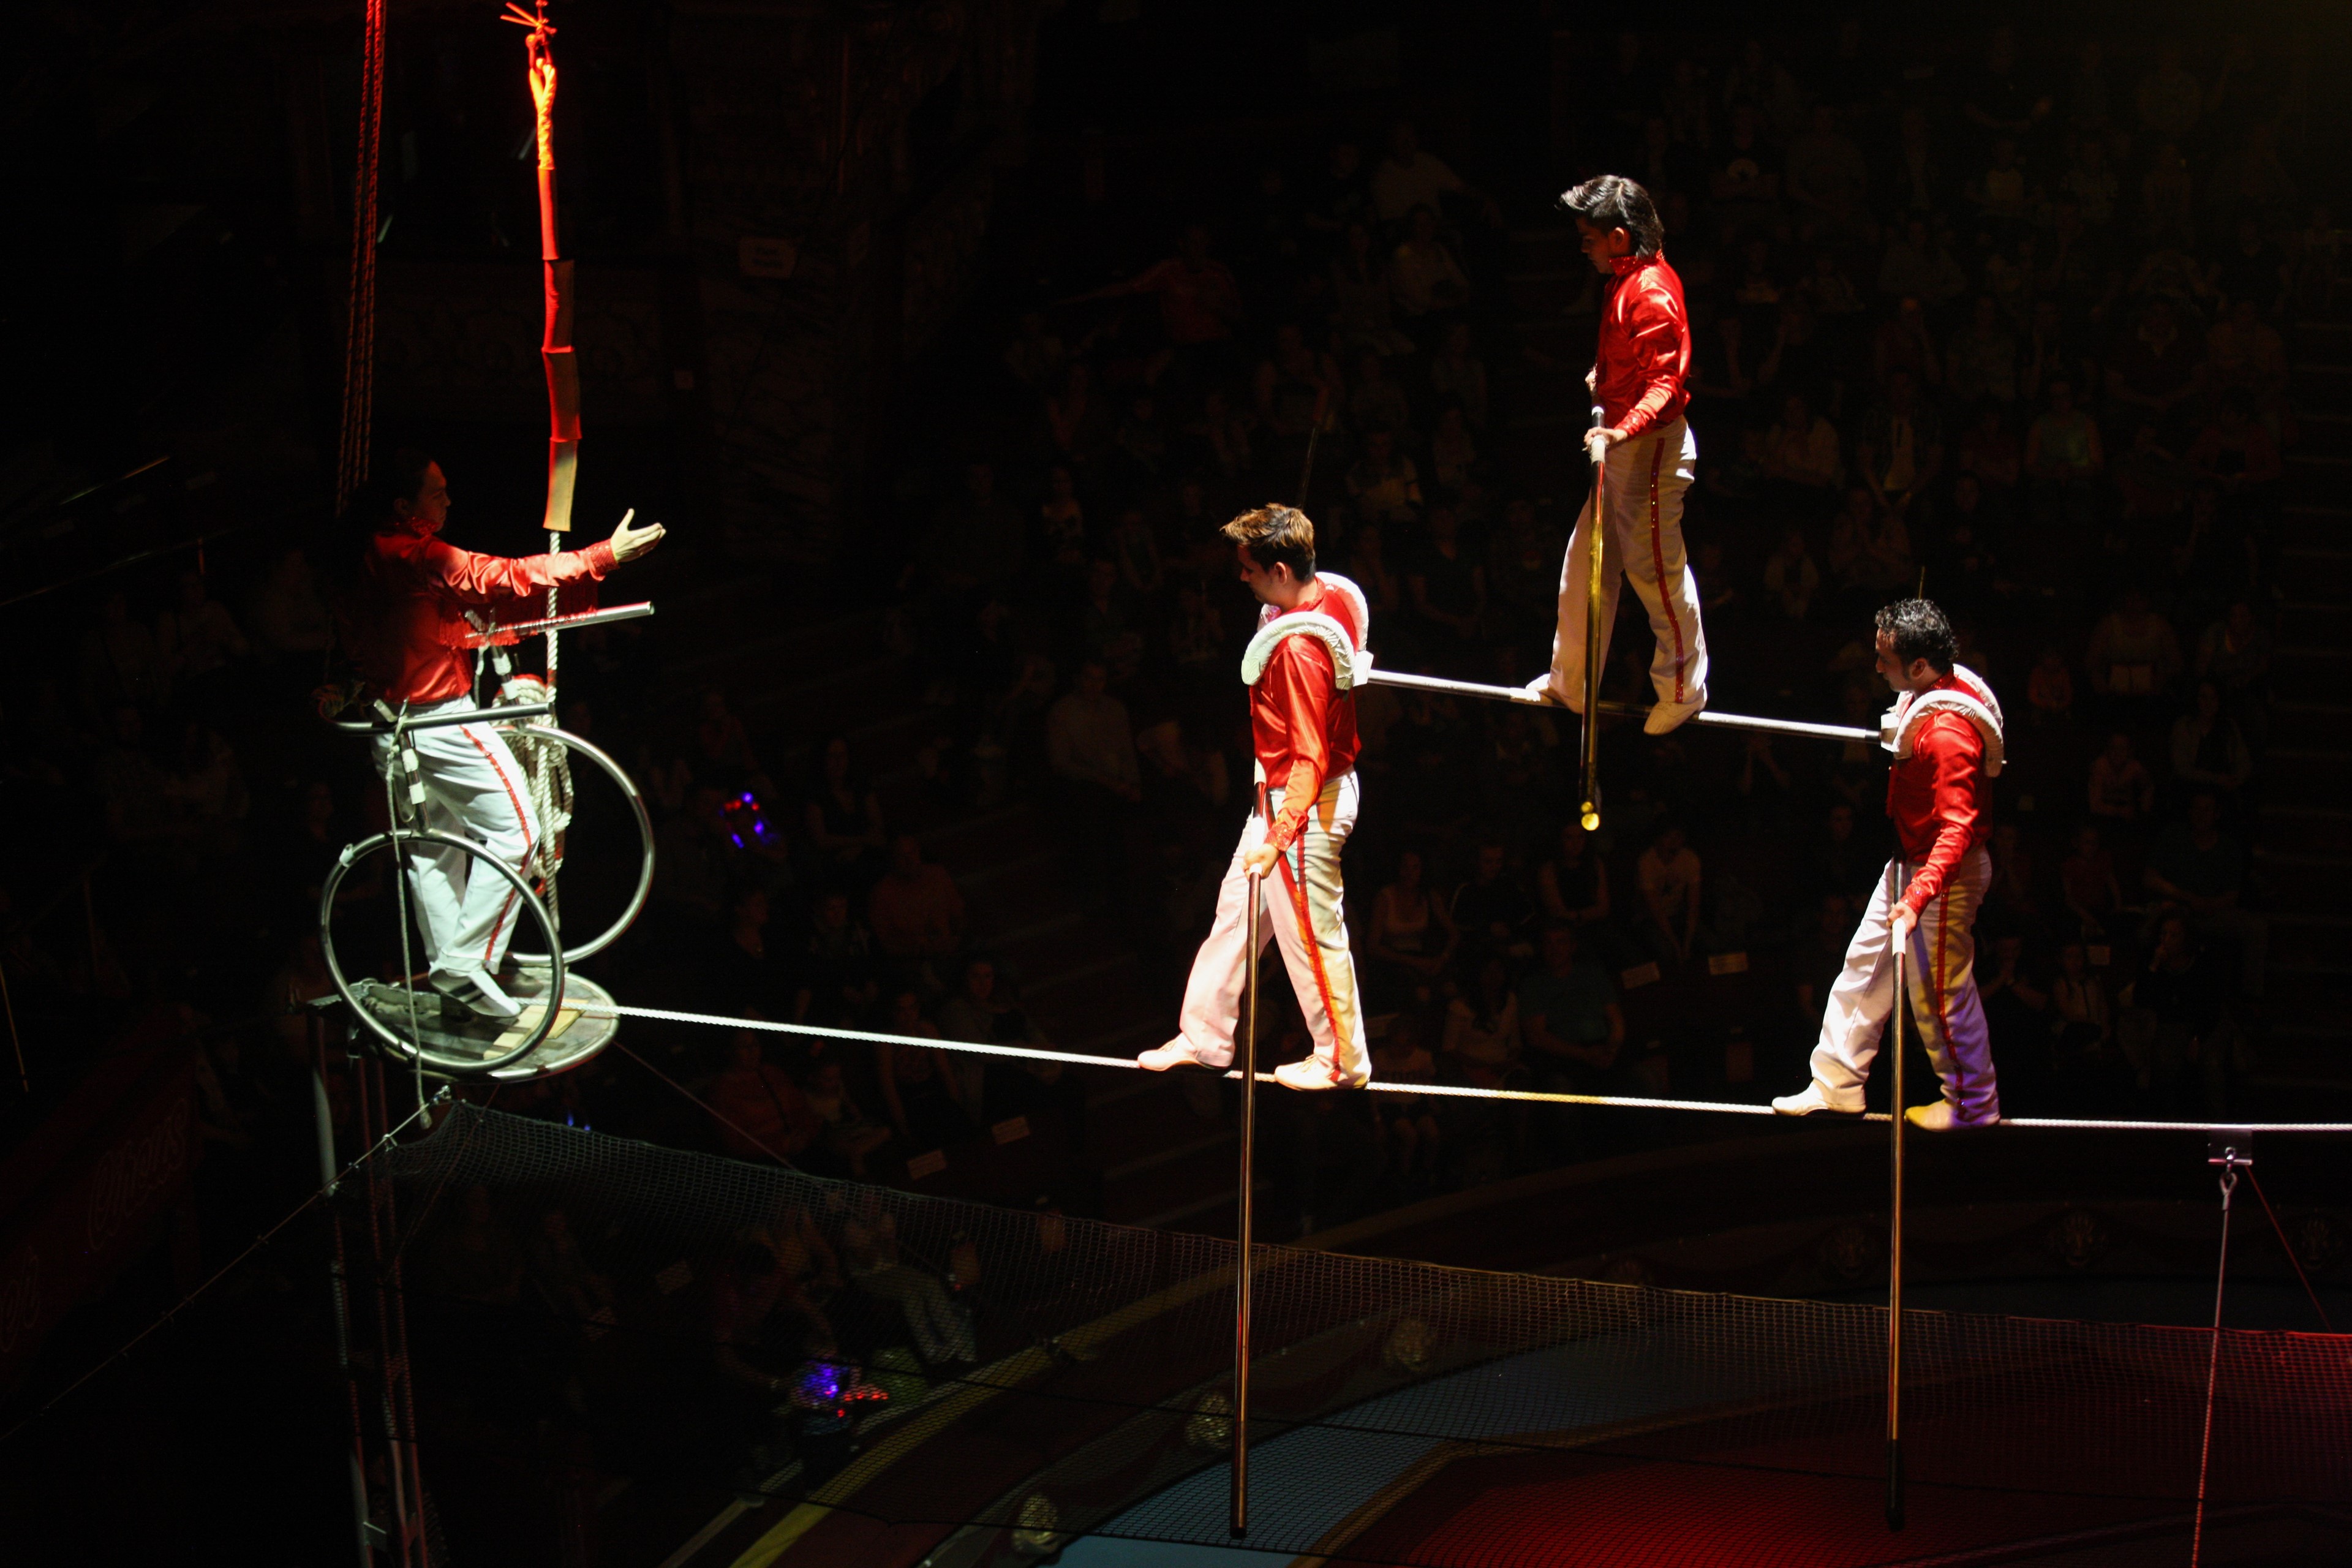 4 Circus performers on a tight rope at the Blackpool Tower Circus